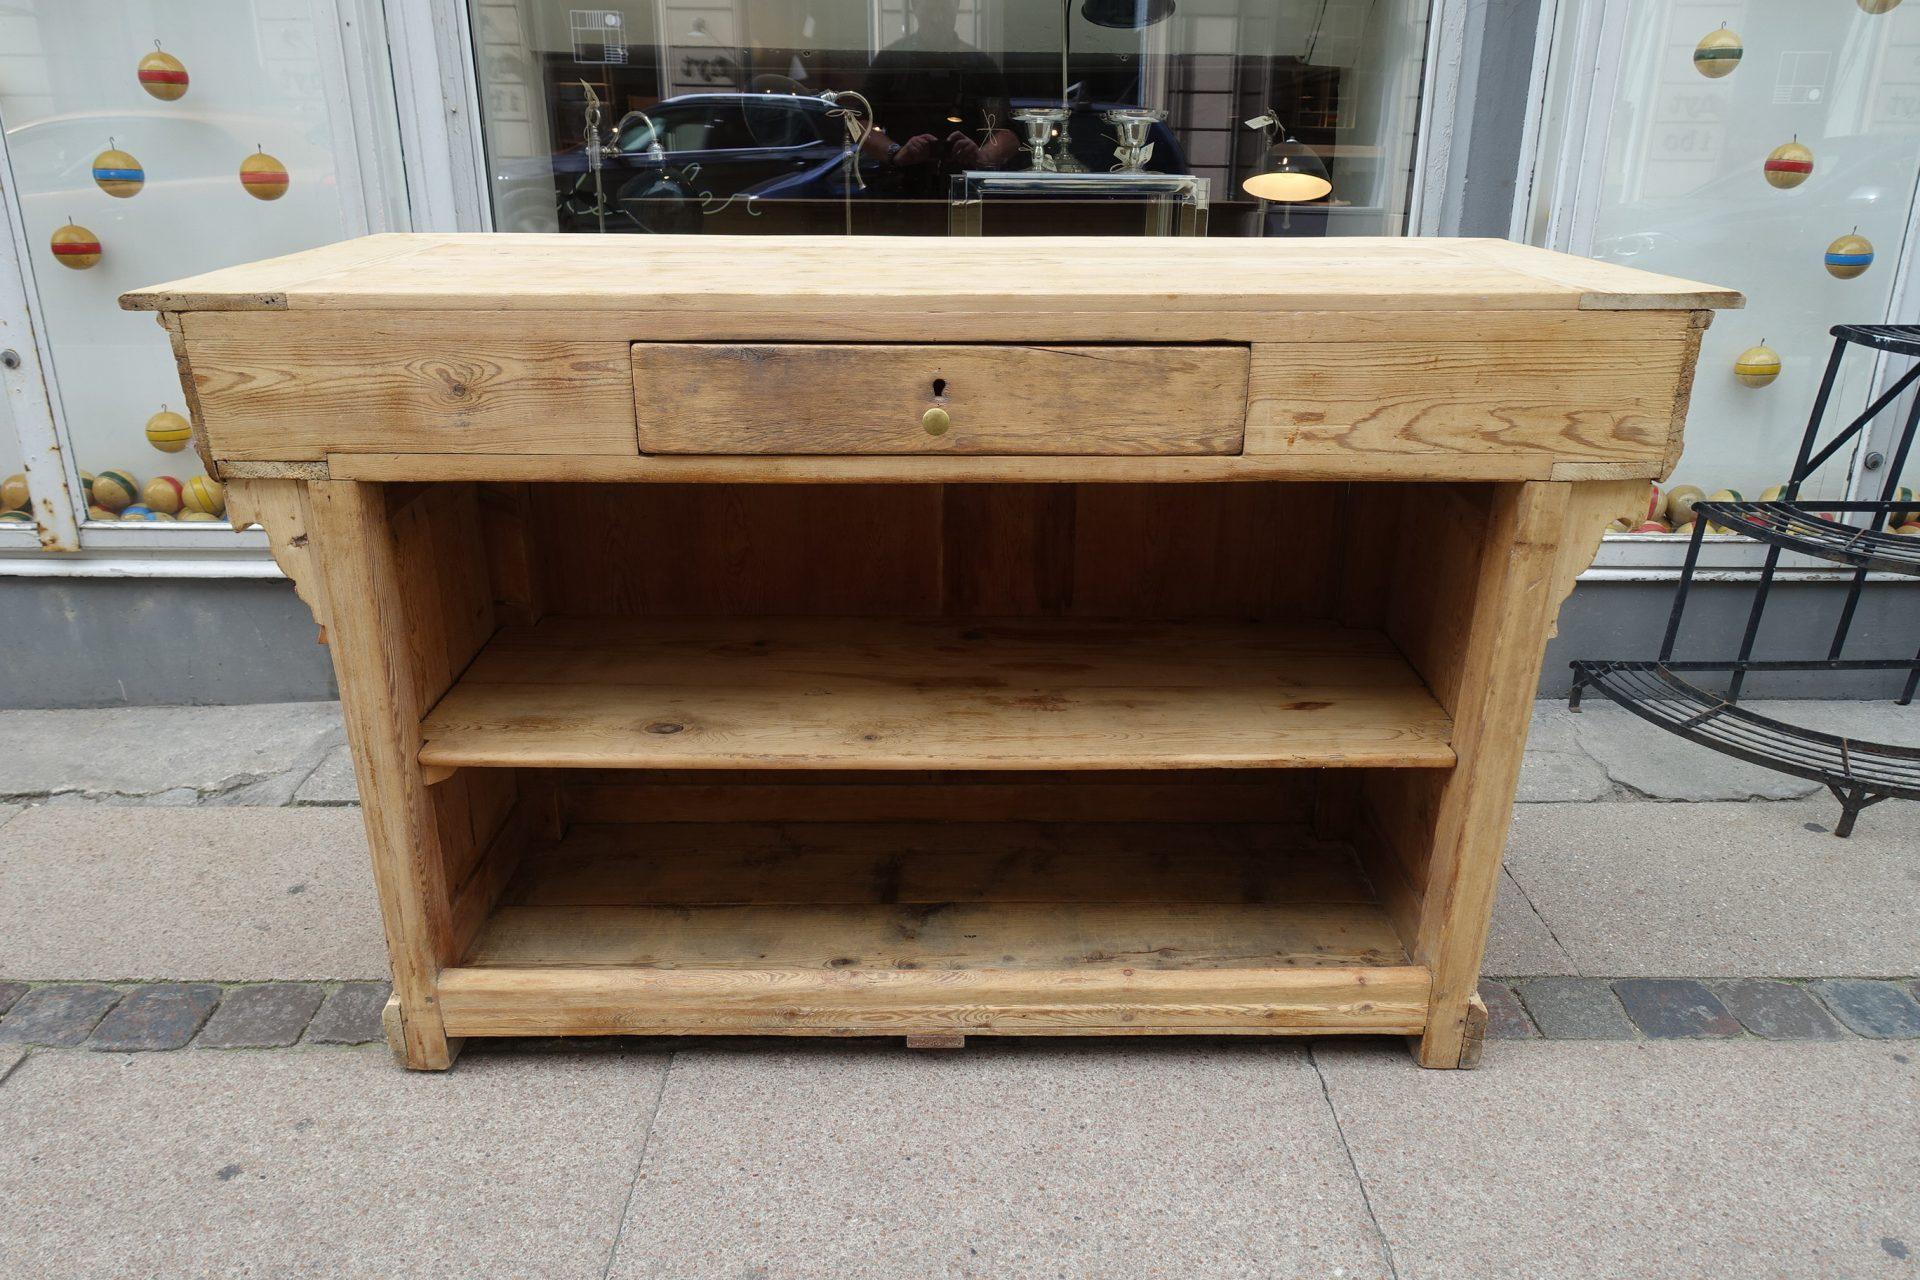 Gorgeous antique shop counter, in lovely pale pine. Originally from a gentlemen’s attire boutique in Montpellier. A gorgeous centrepiece for a showroom. Behind, it has and open compartment / cubby space, and shelving, as well as a drawer for the